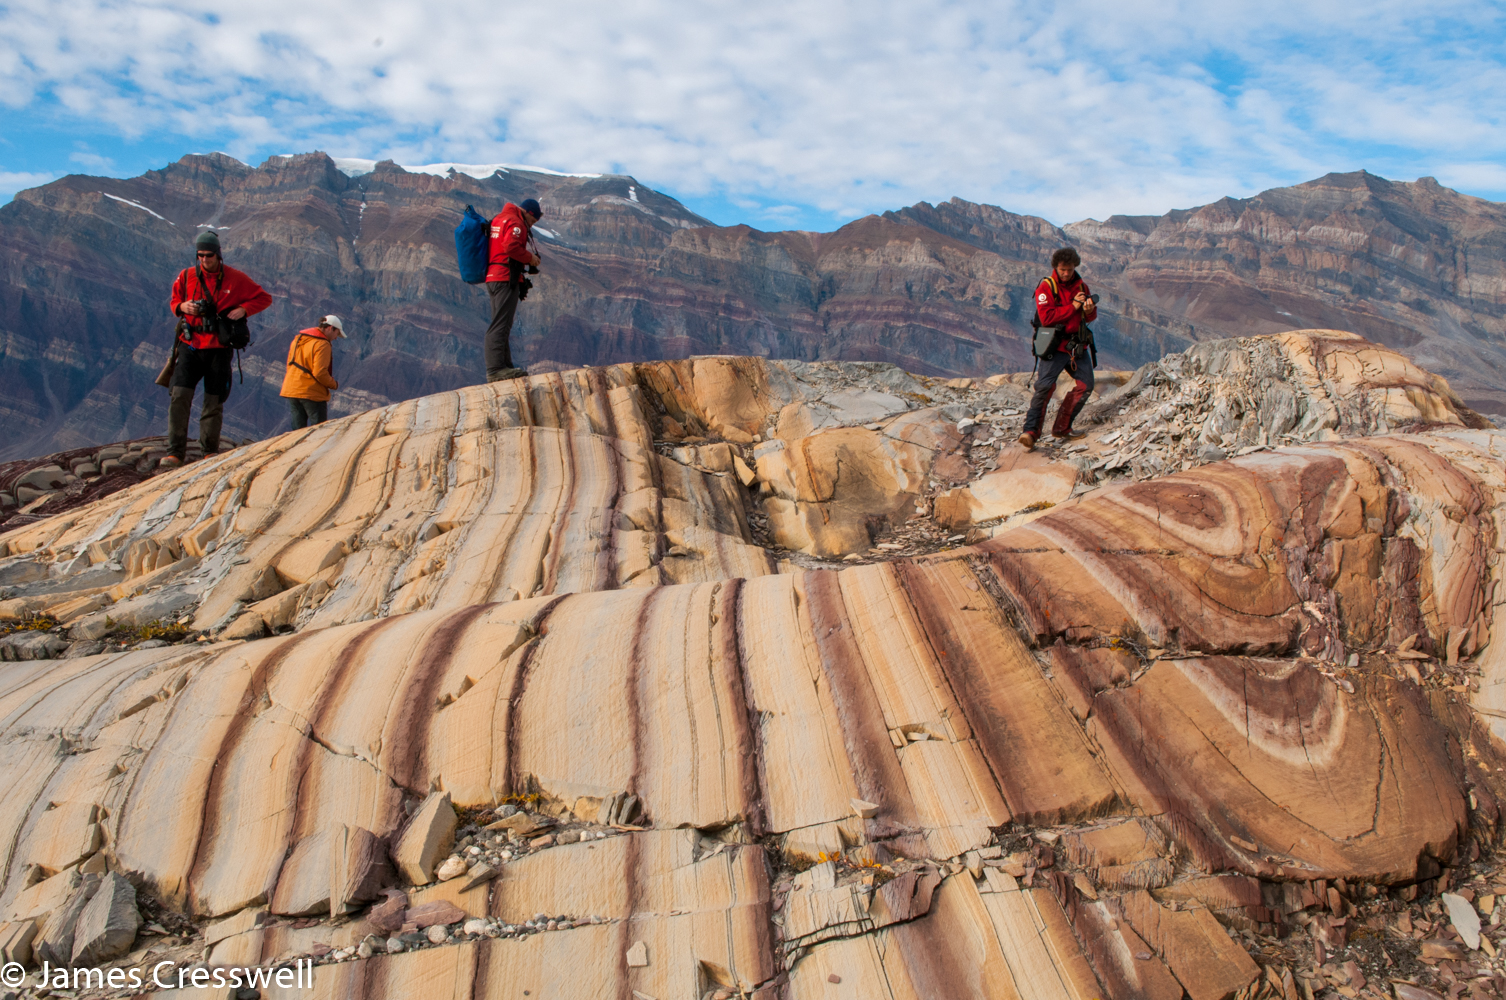 A photograph of people standing on stripy rocks, taken in east Greenland on a PolarWorld Travel placed cruise